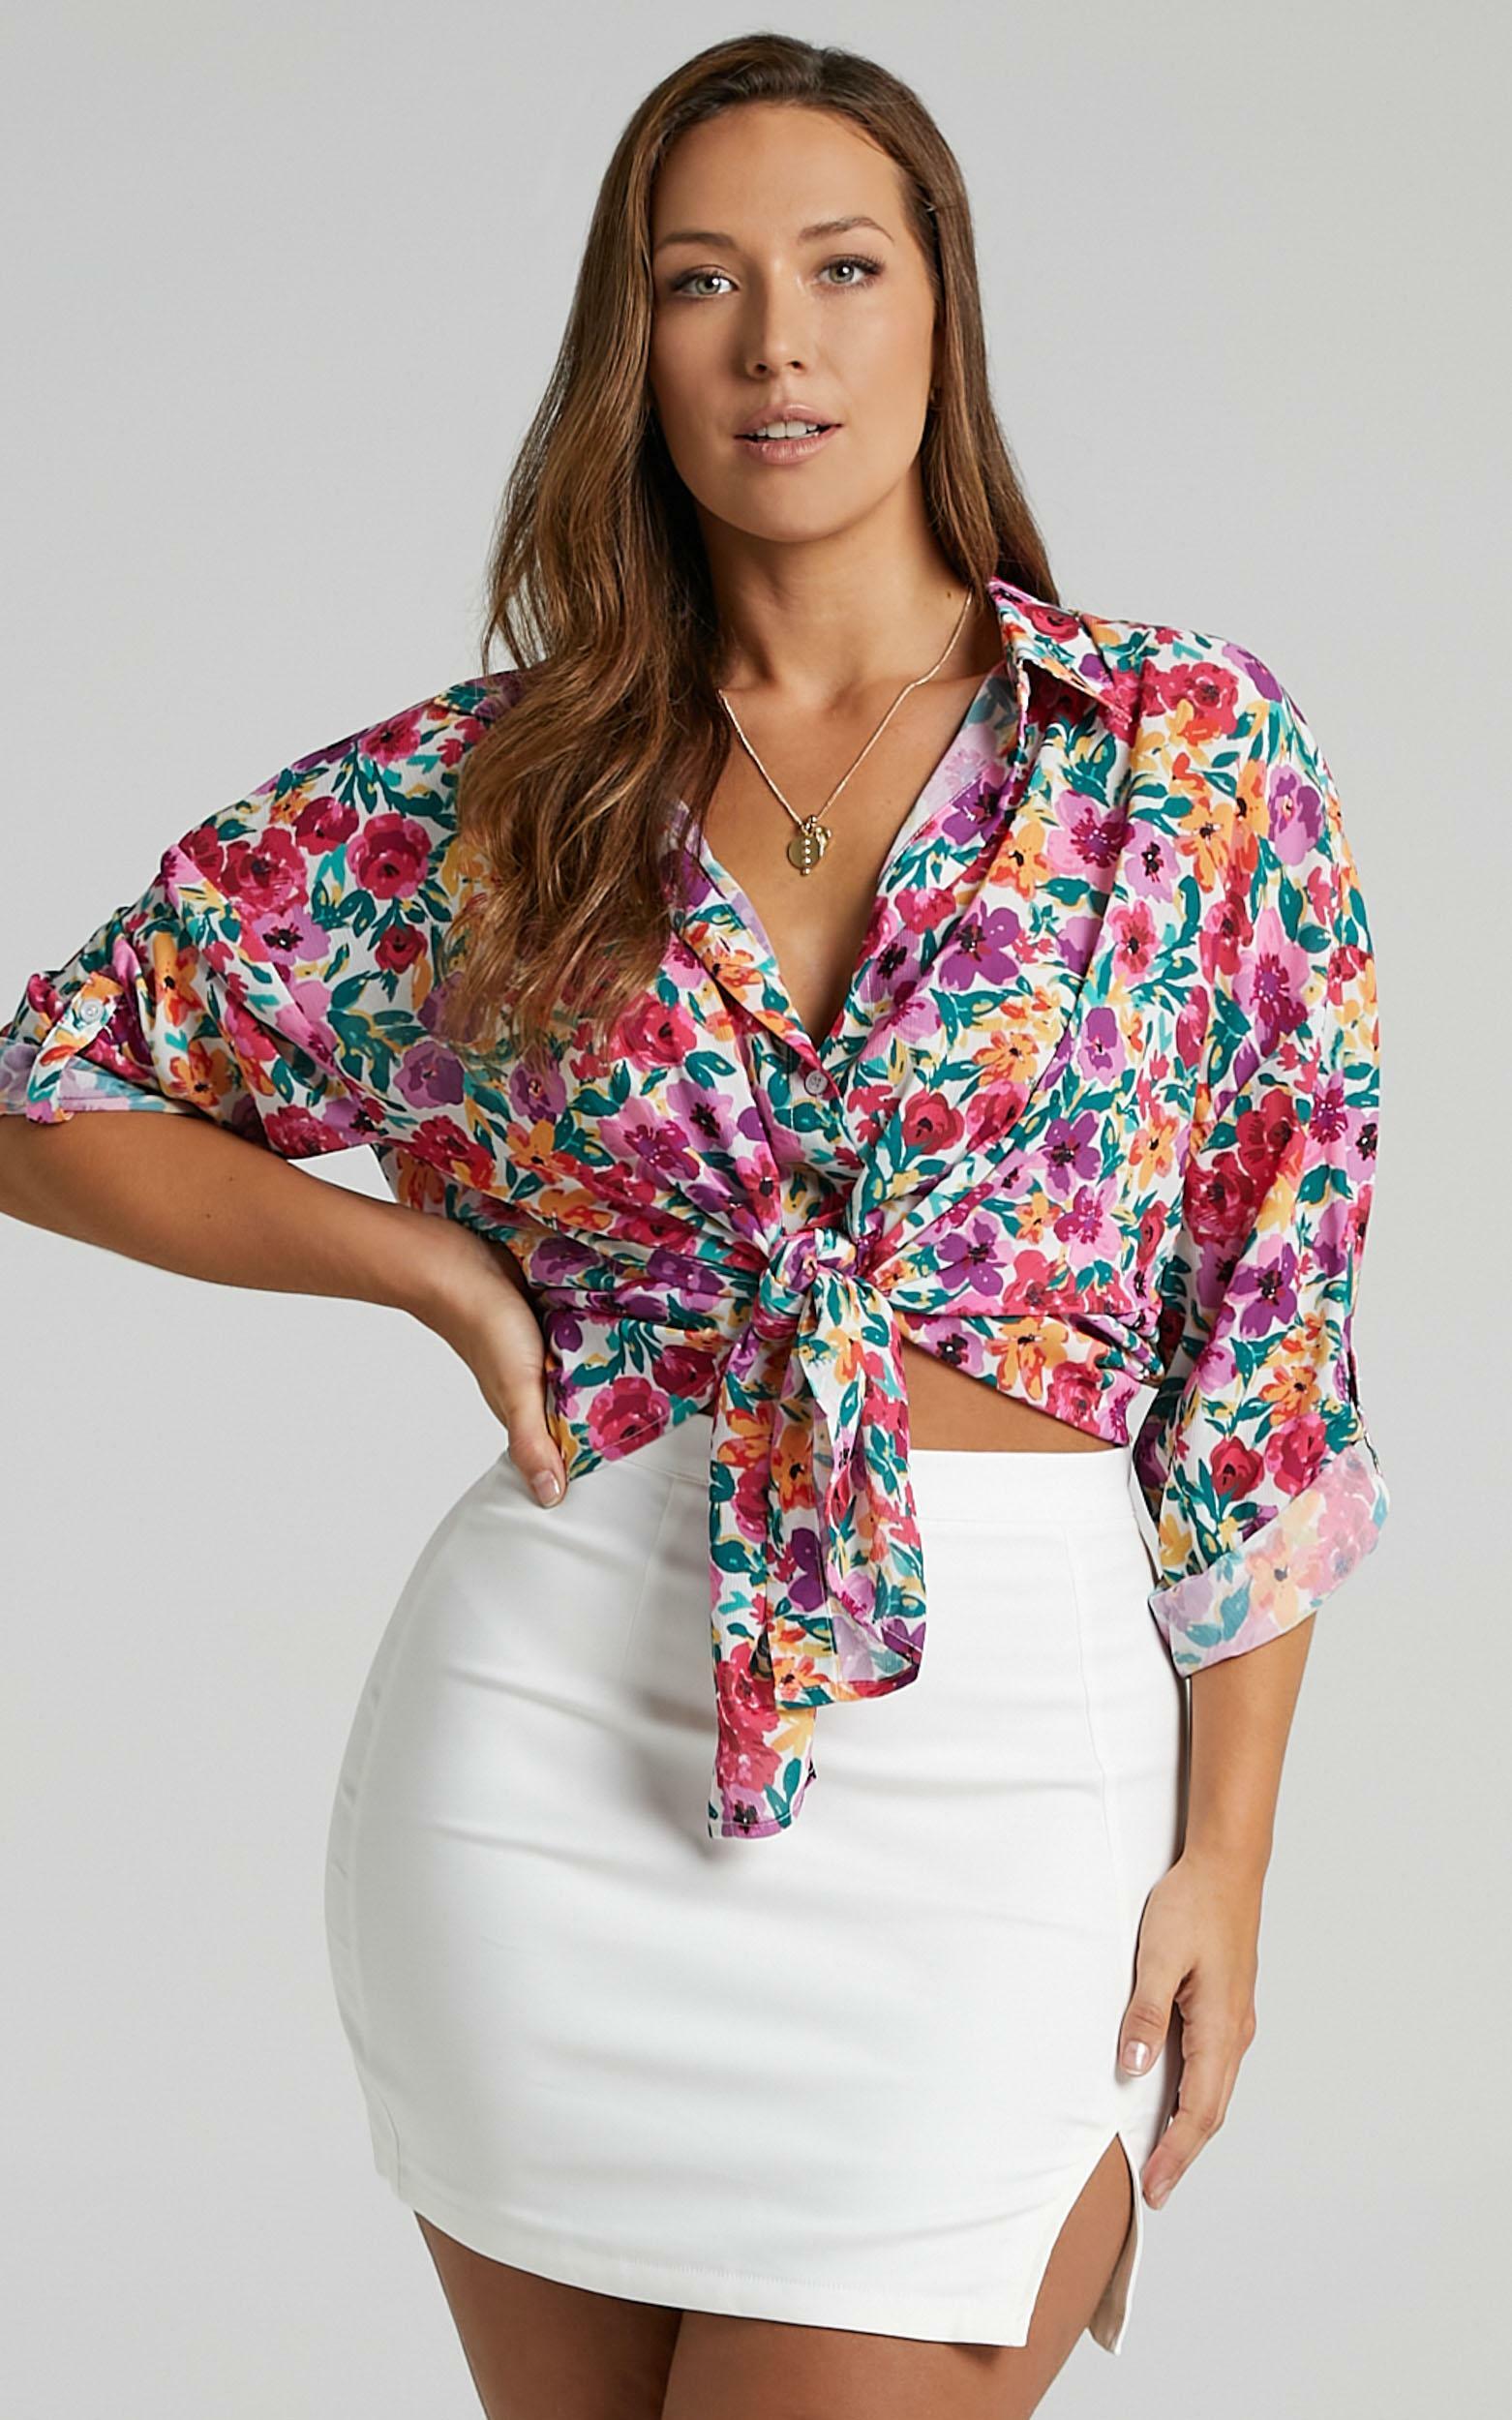 Morning Call Shirt in Packed Floral - 6 (XS), Multi, hi-res image number null